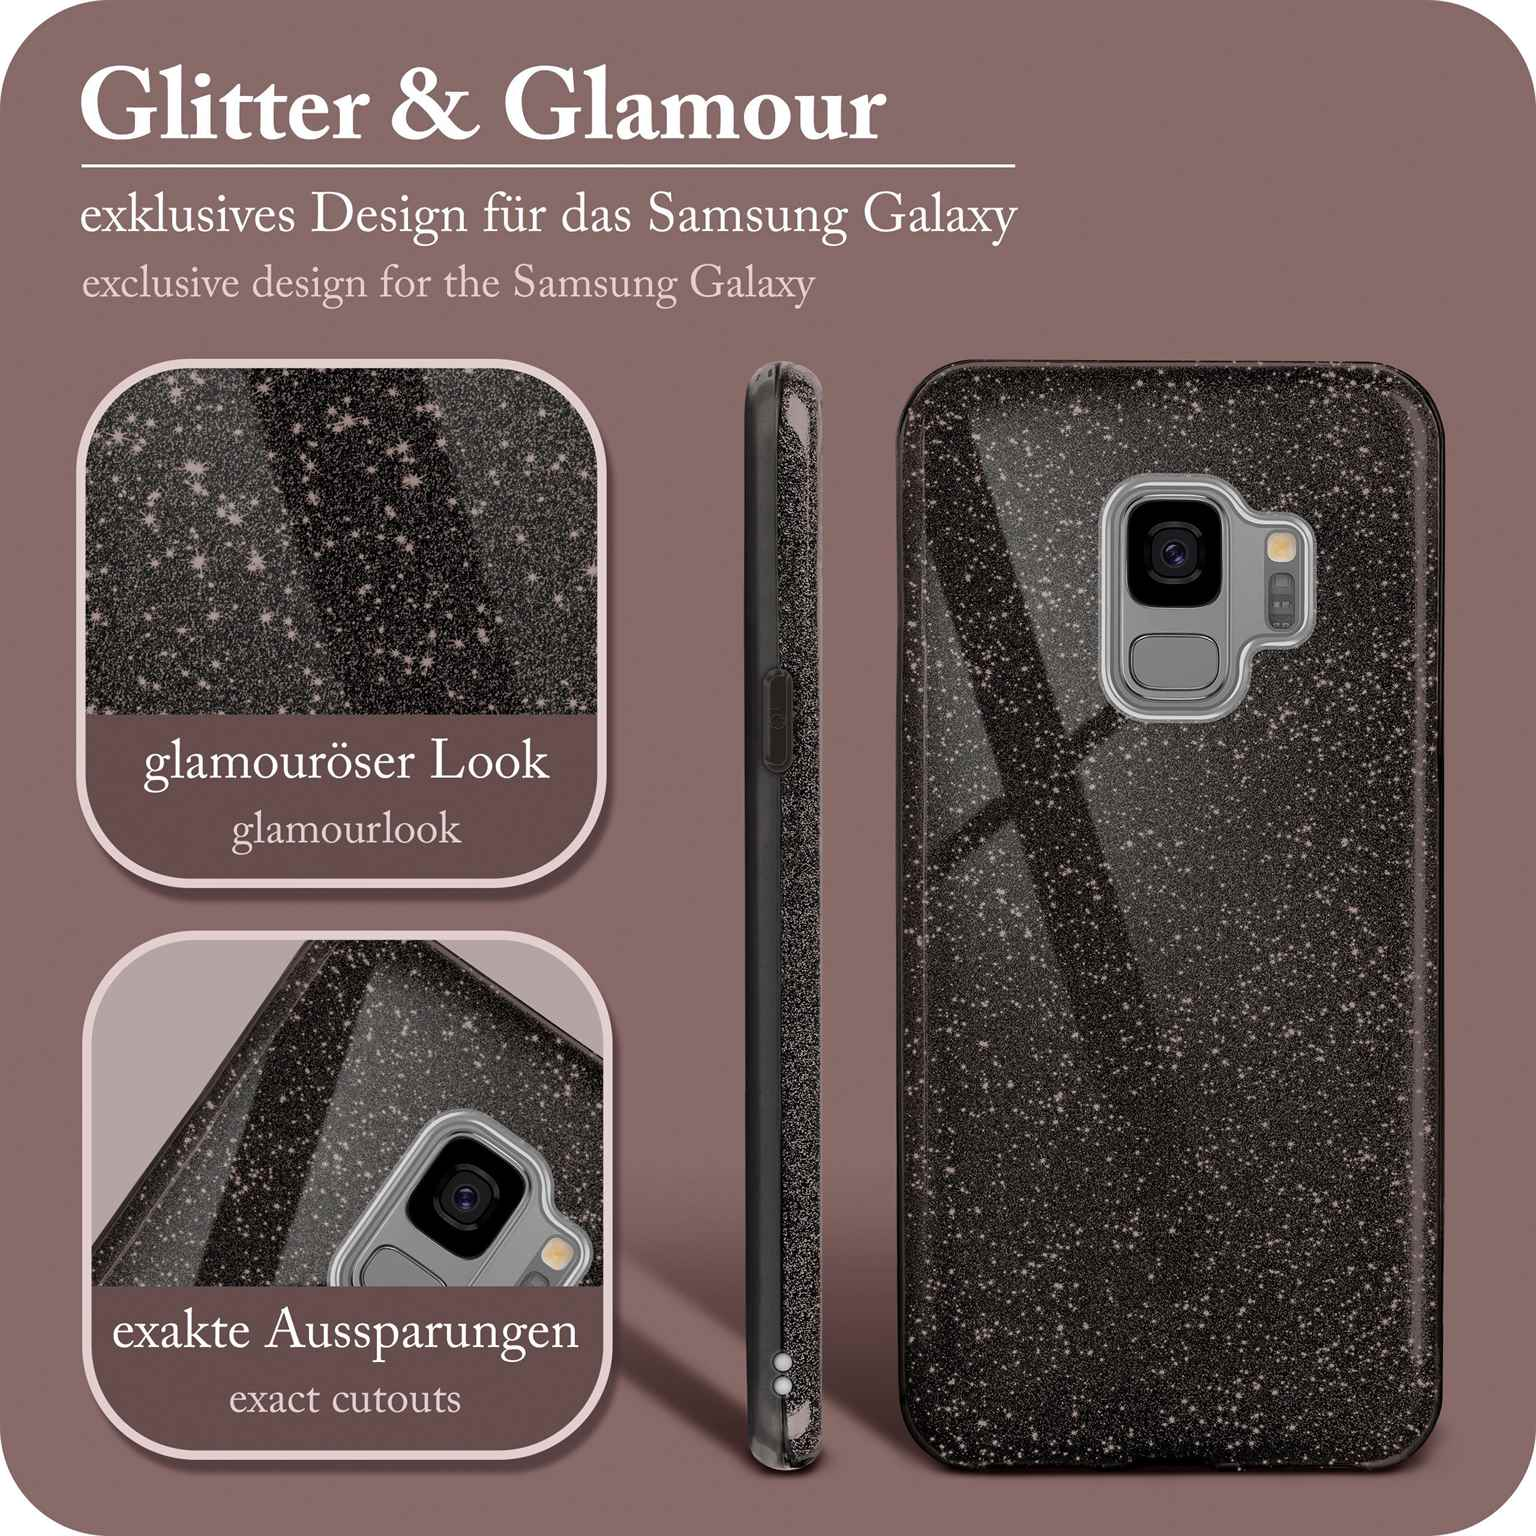 Glitter Case, Black ONEFLOW Samsung, Galaxy Glamour - S9, Backcover,